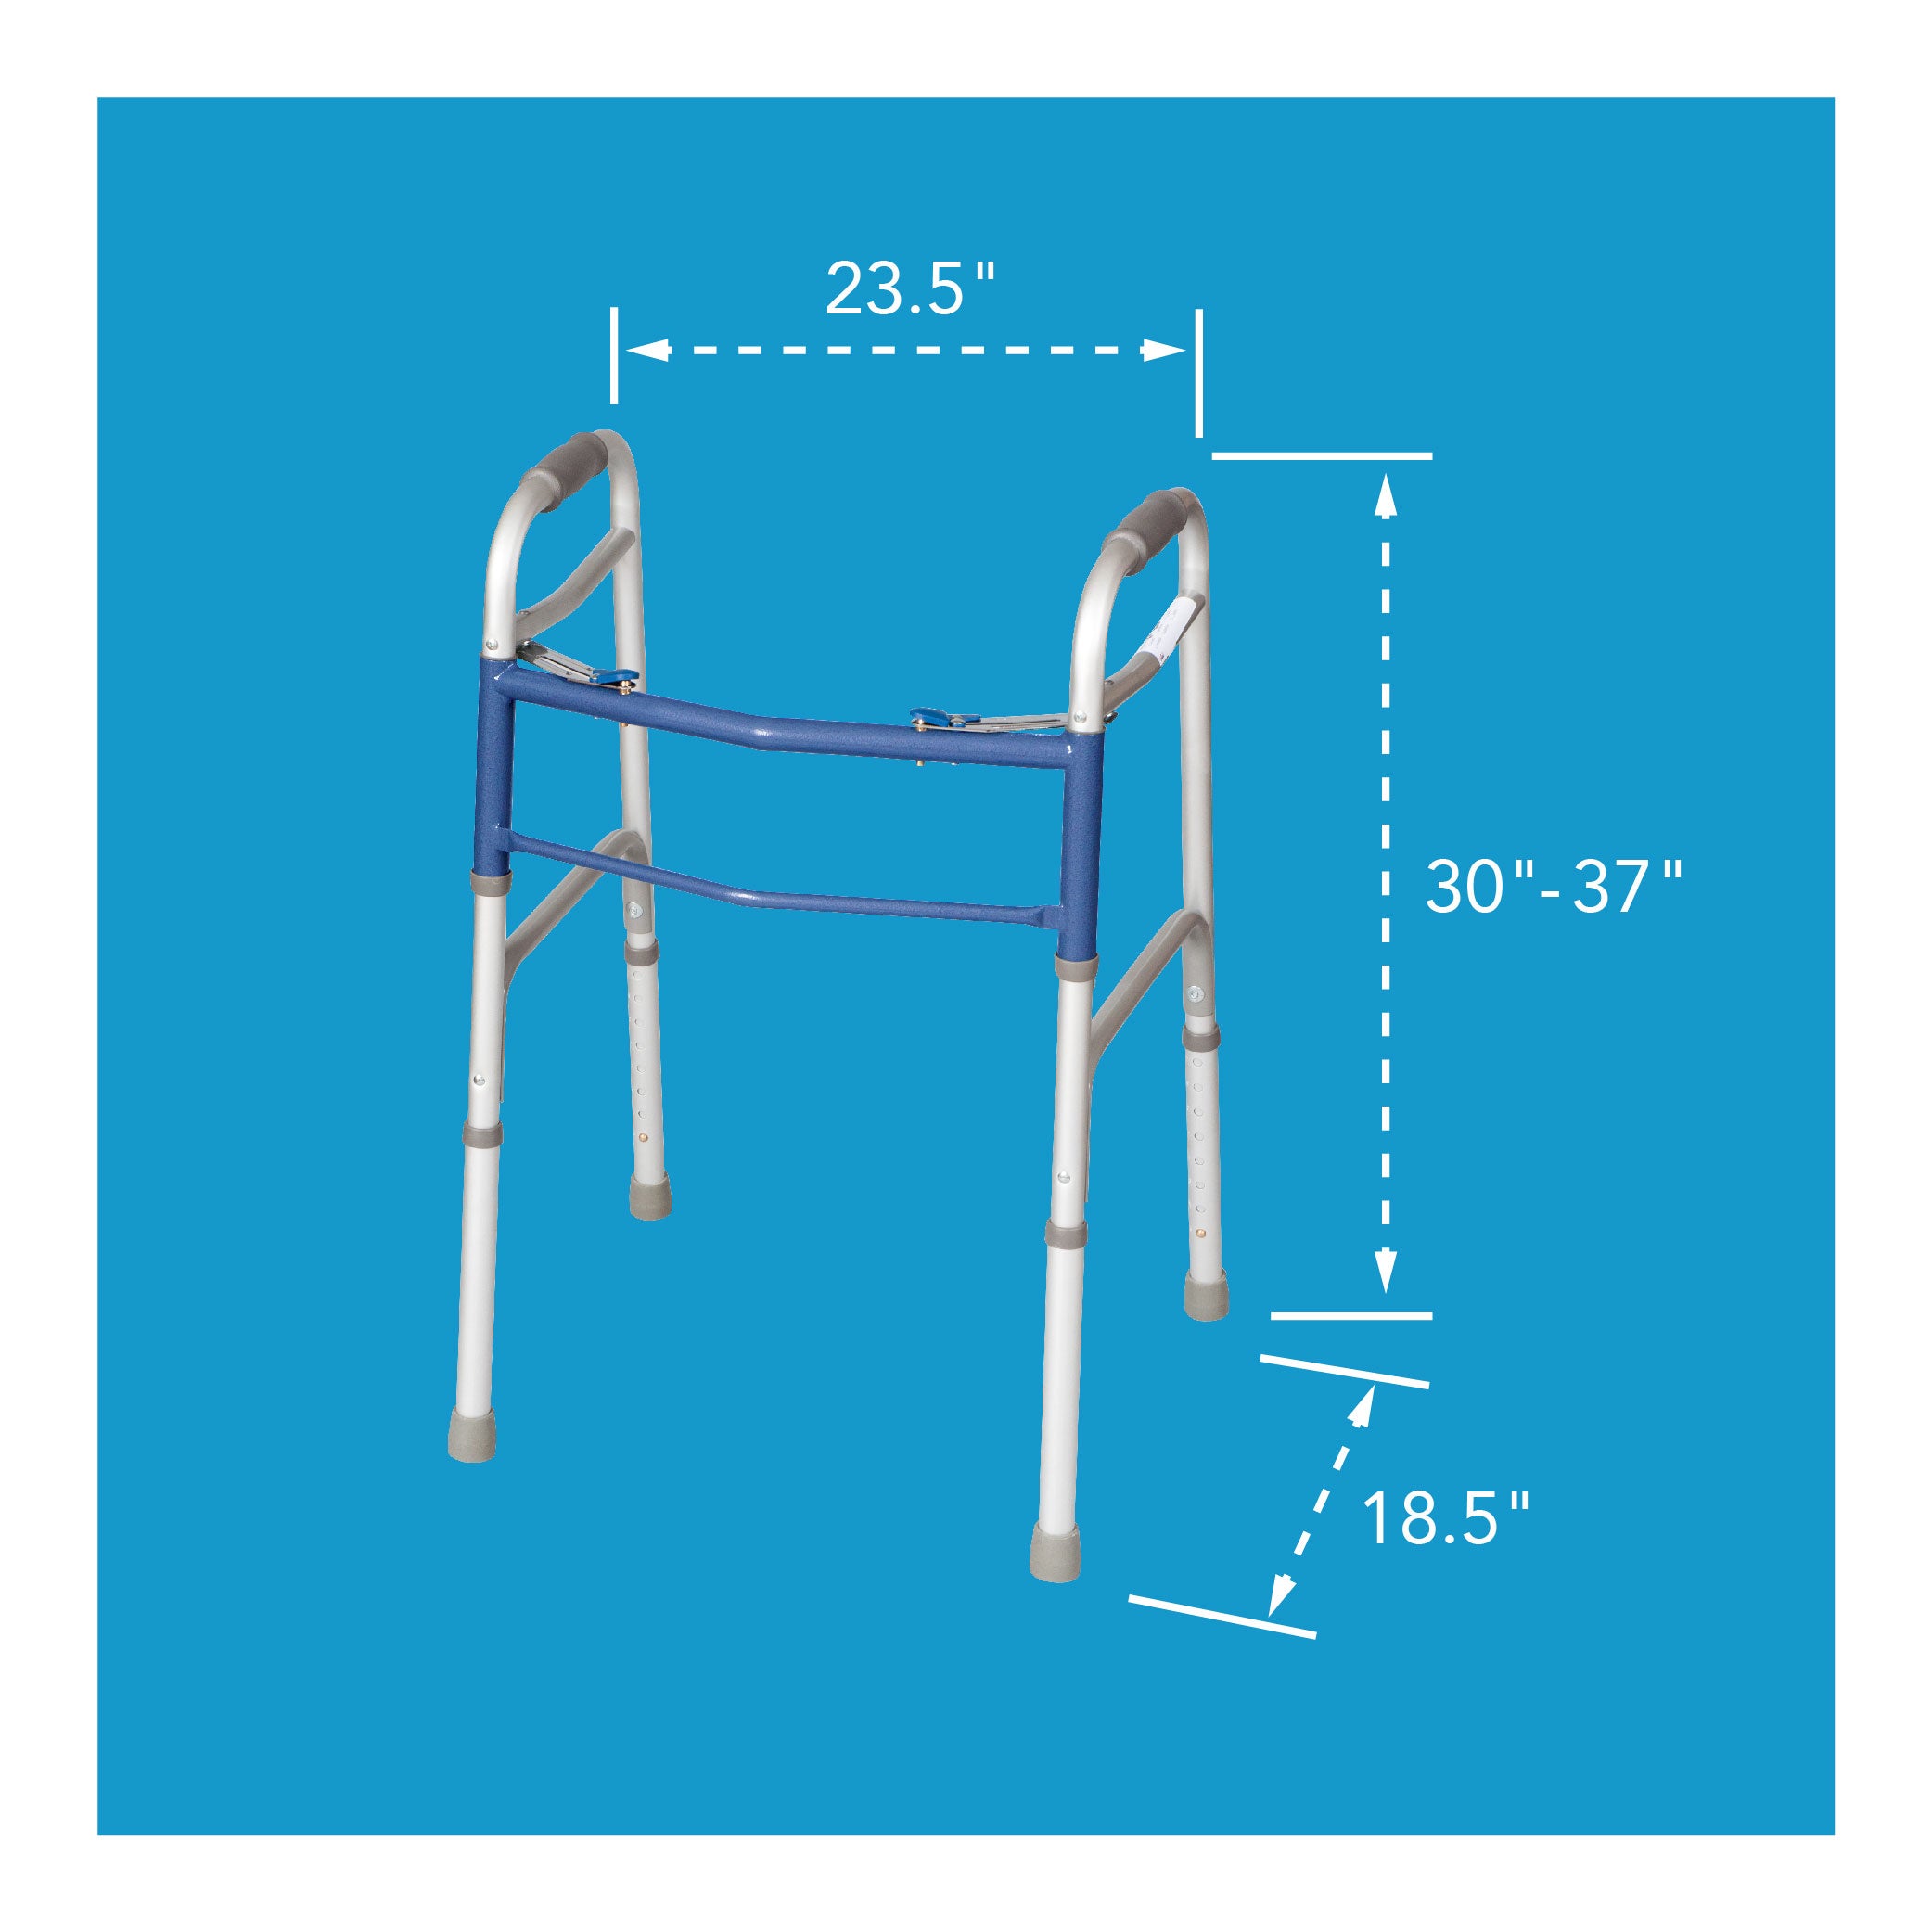 Dual-button walker with size dimensions. 30-37